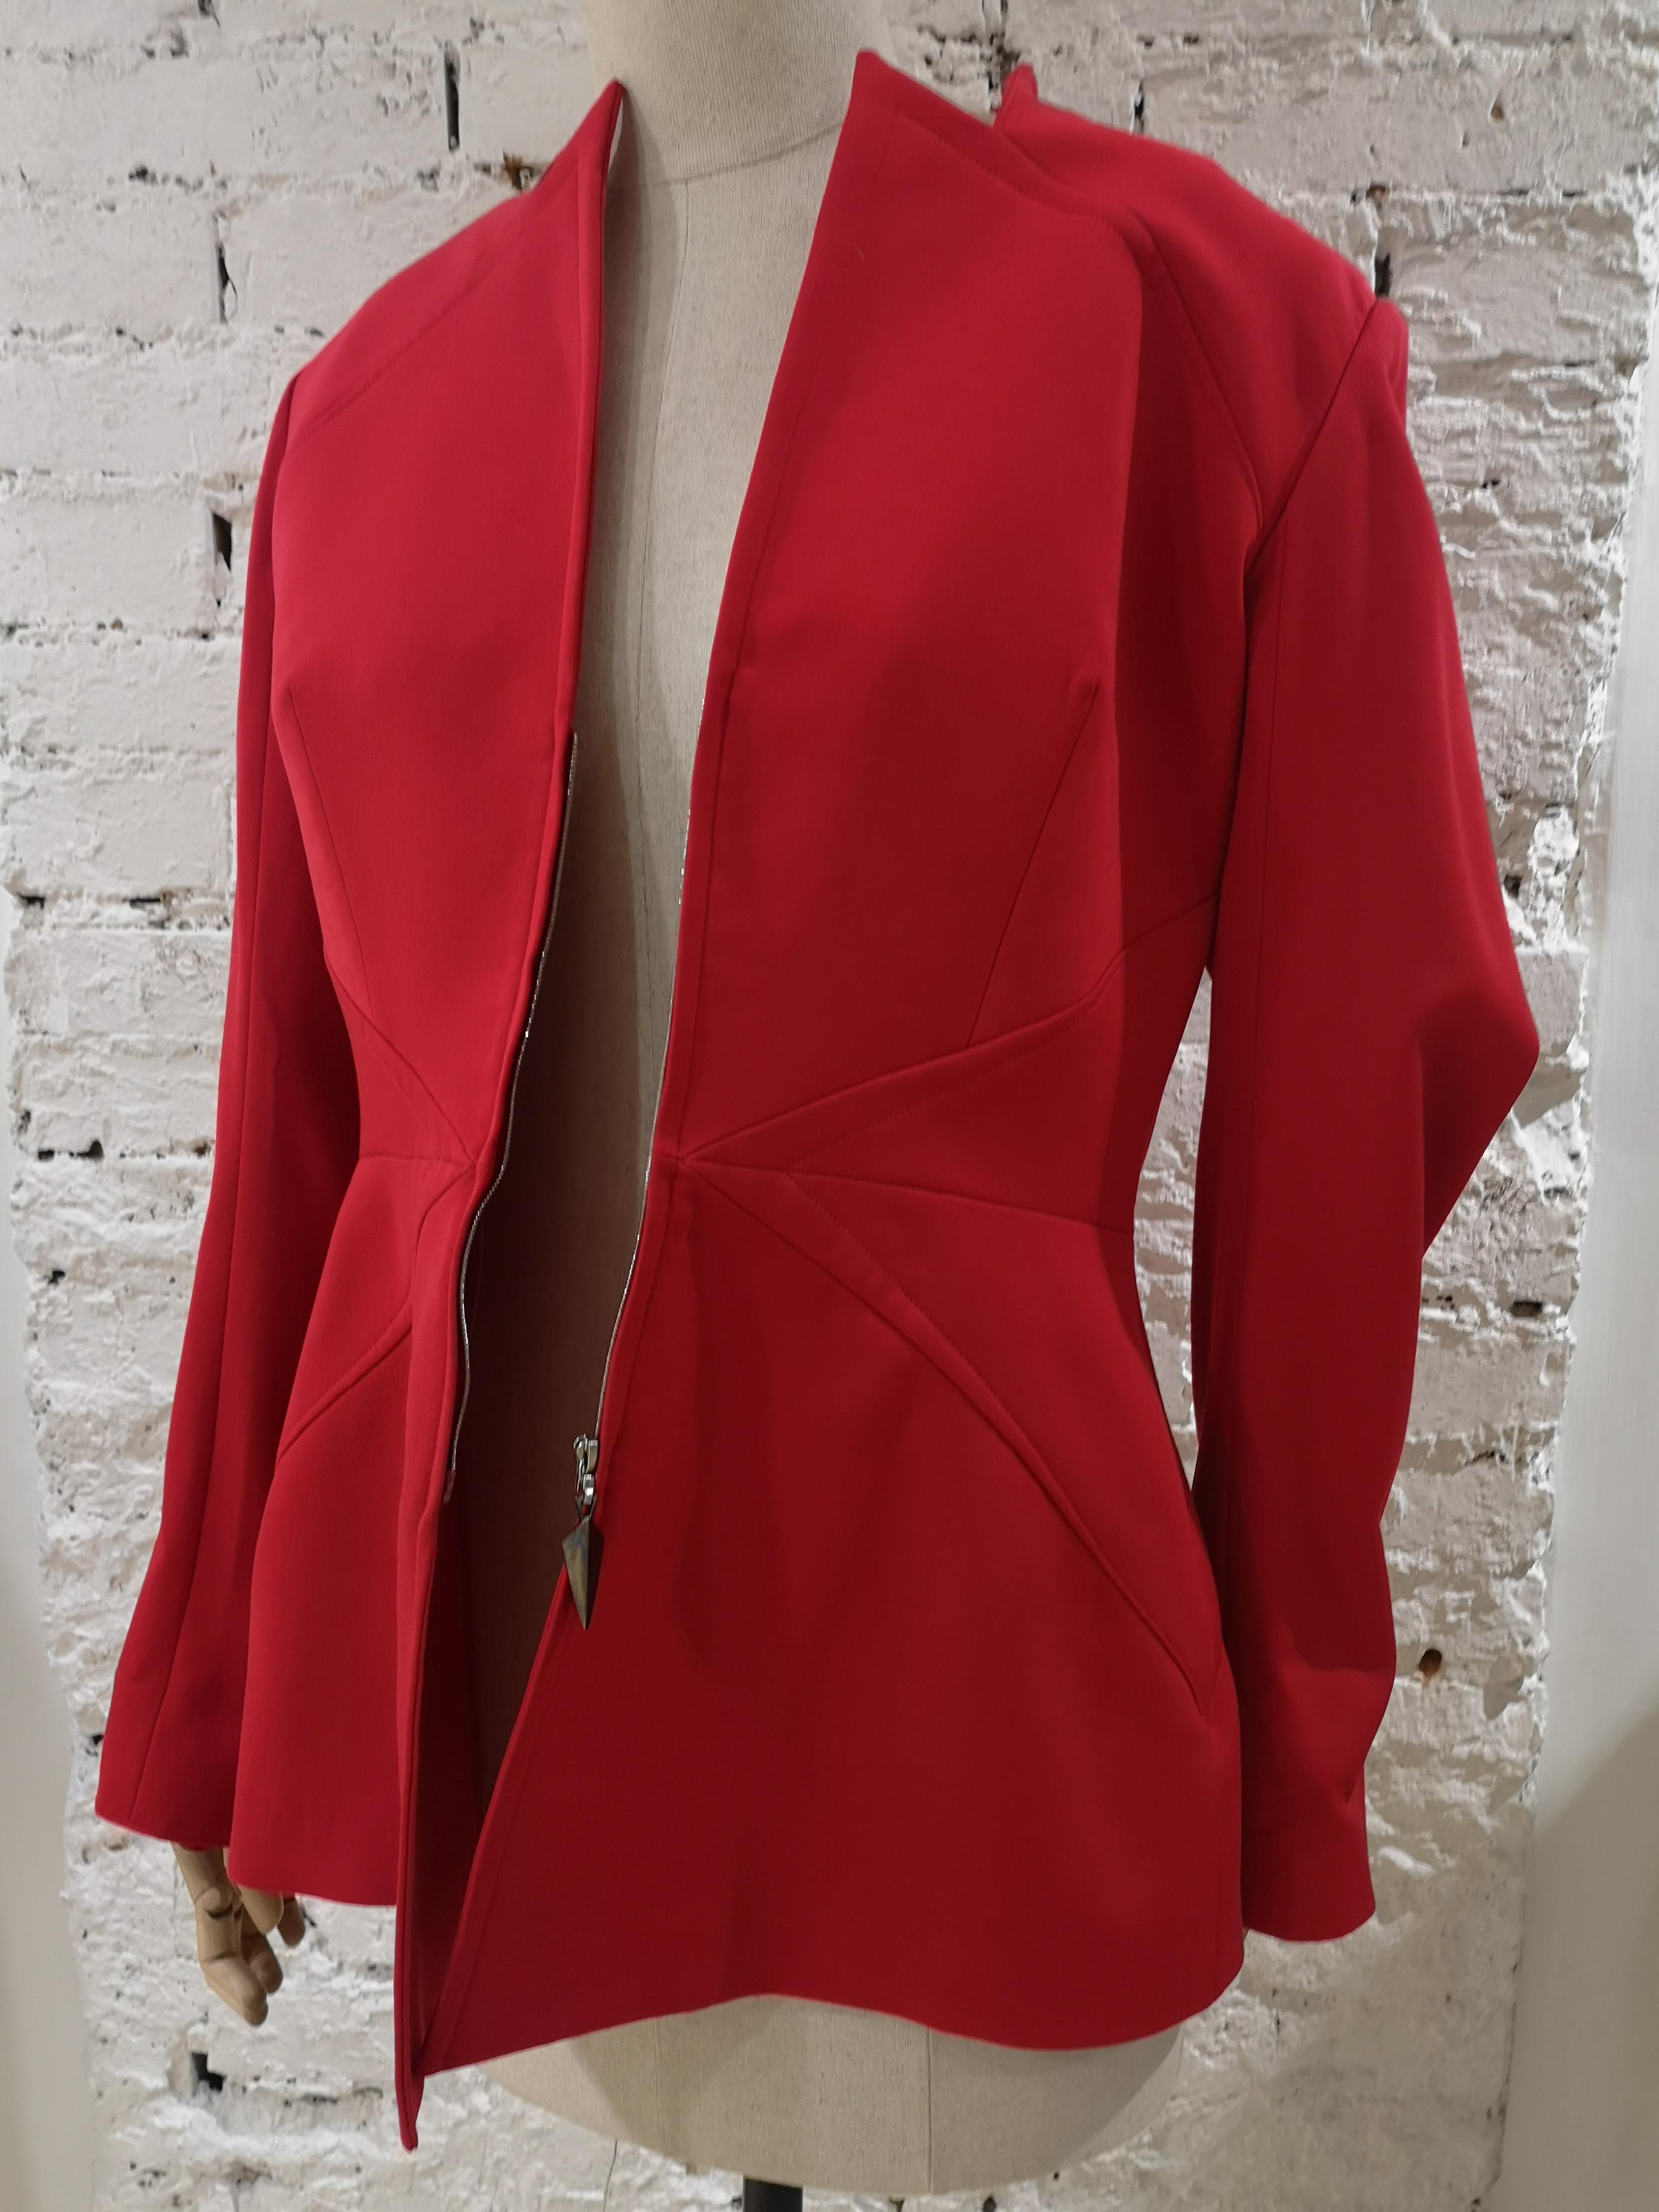 Thierry Mugler Red Jacket For Sale 6